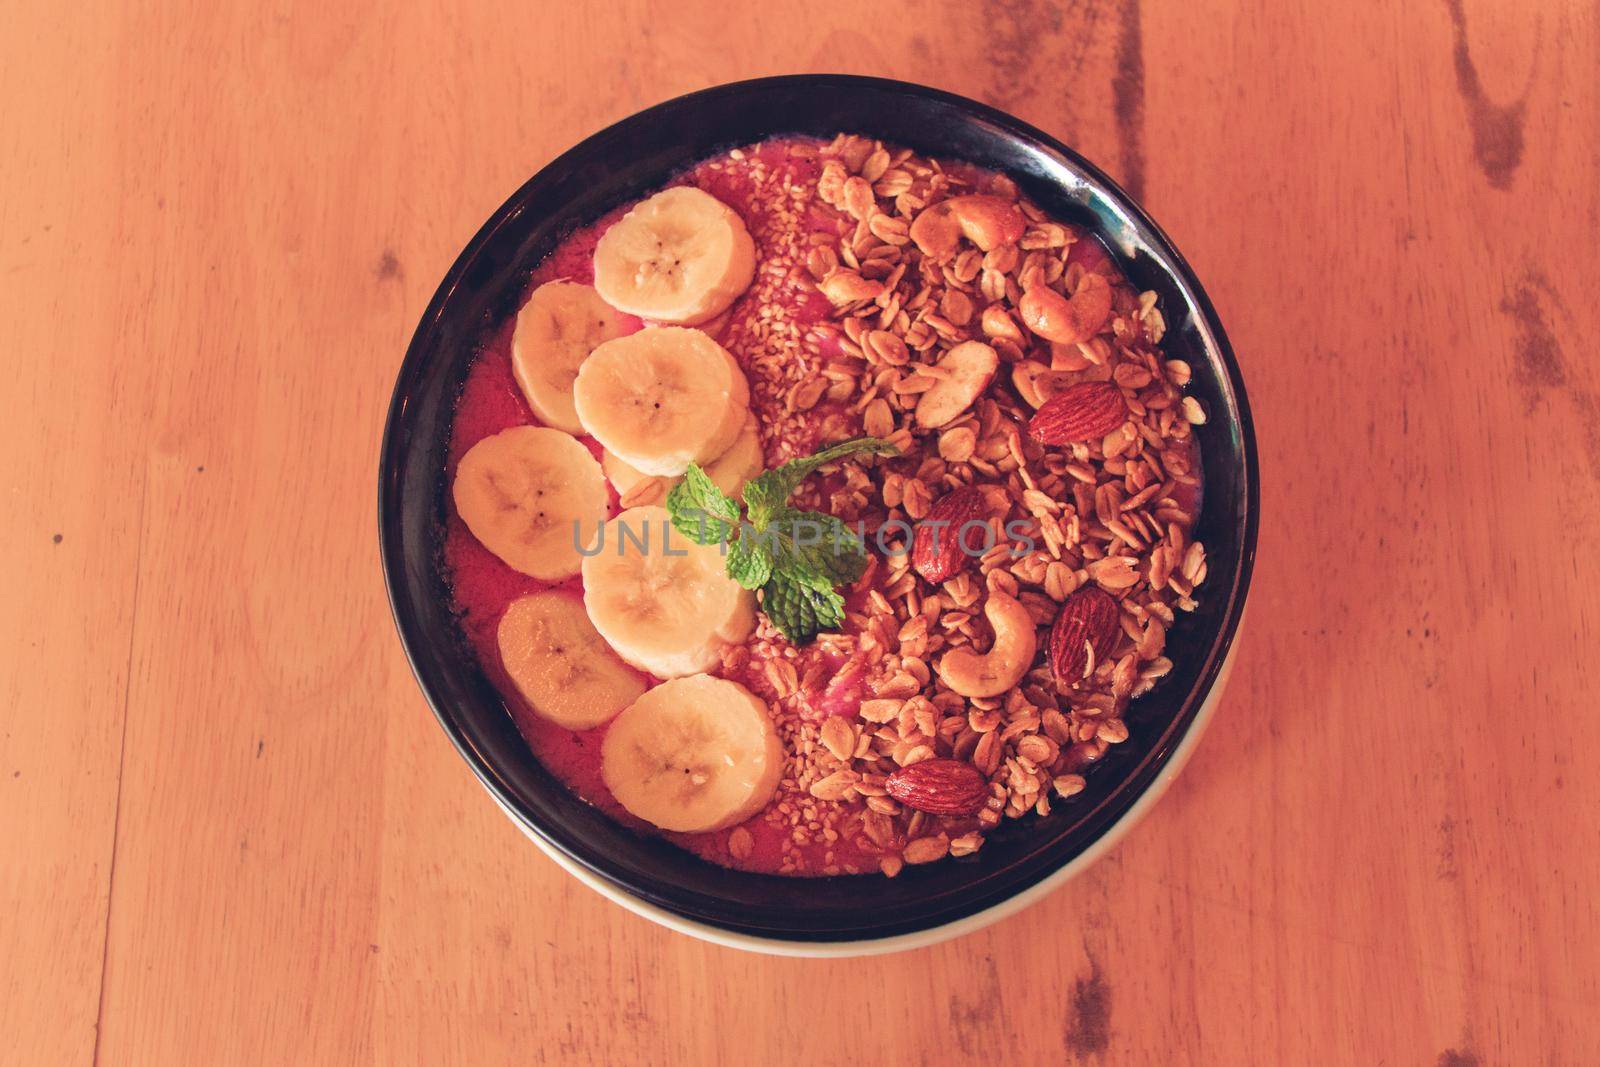 Top View of a Vegan Smoothie Bowl by Sonnet15